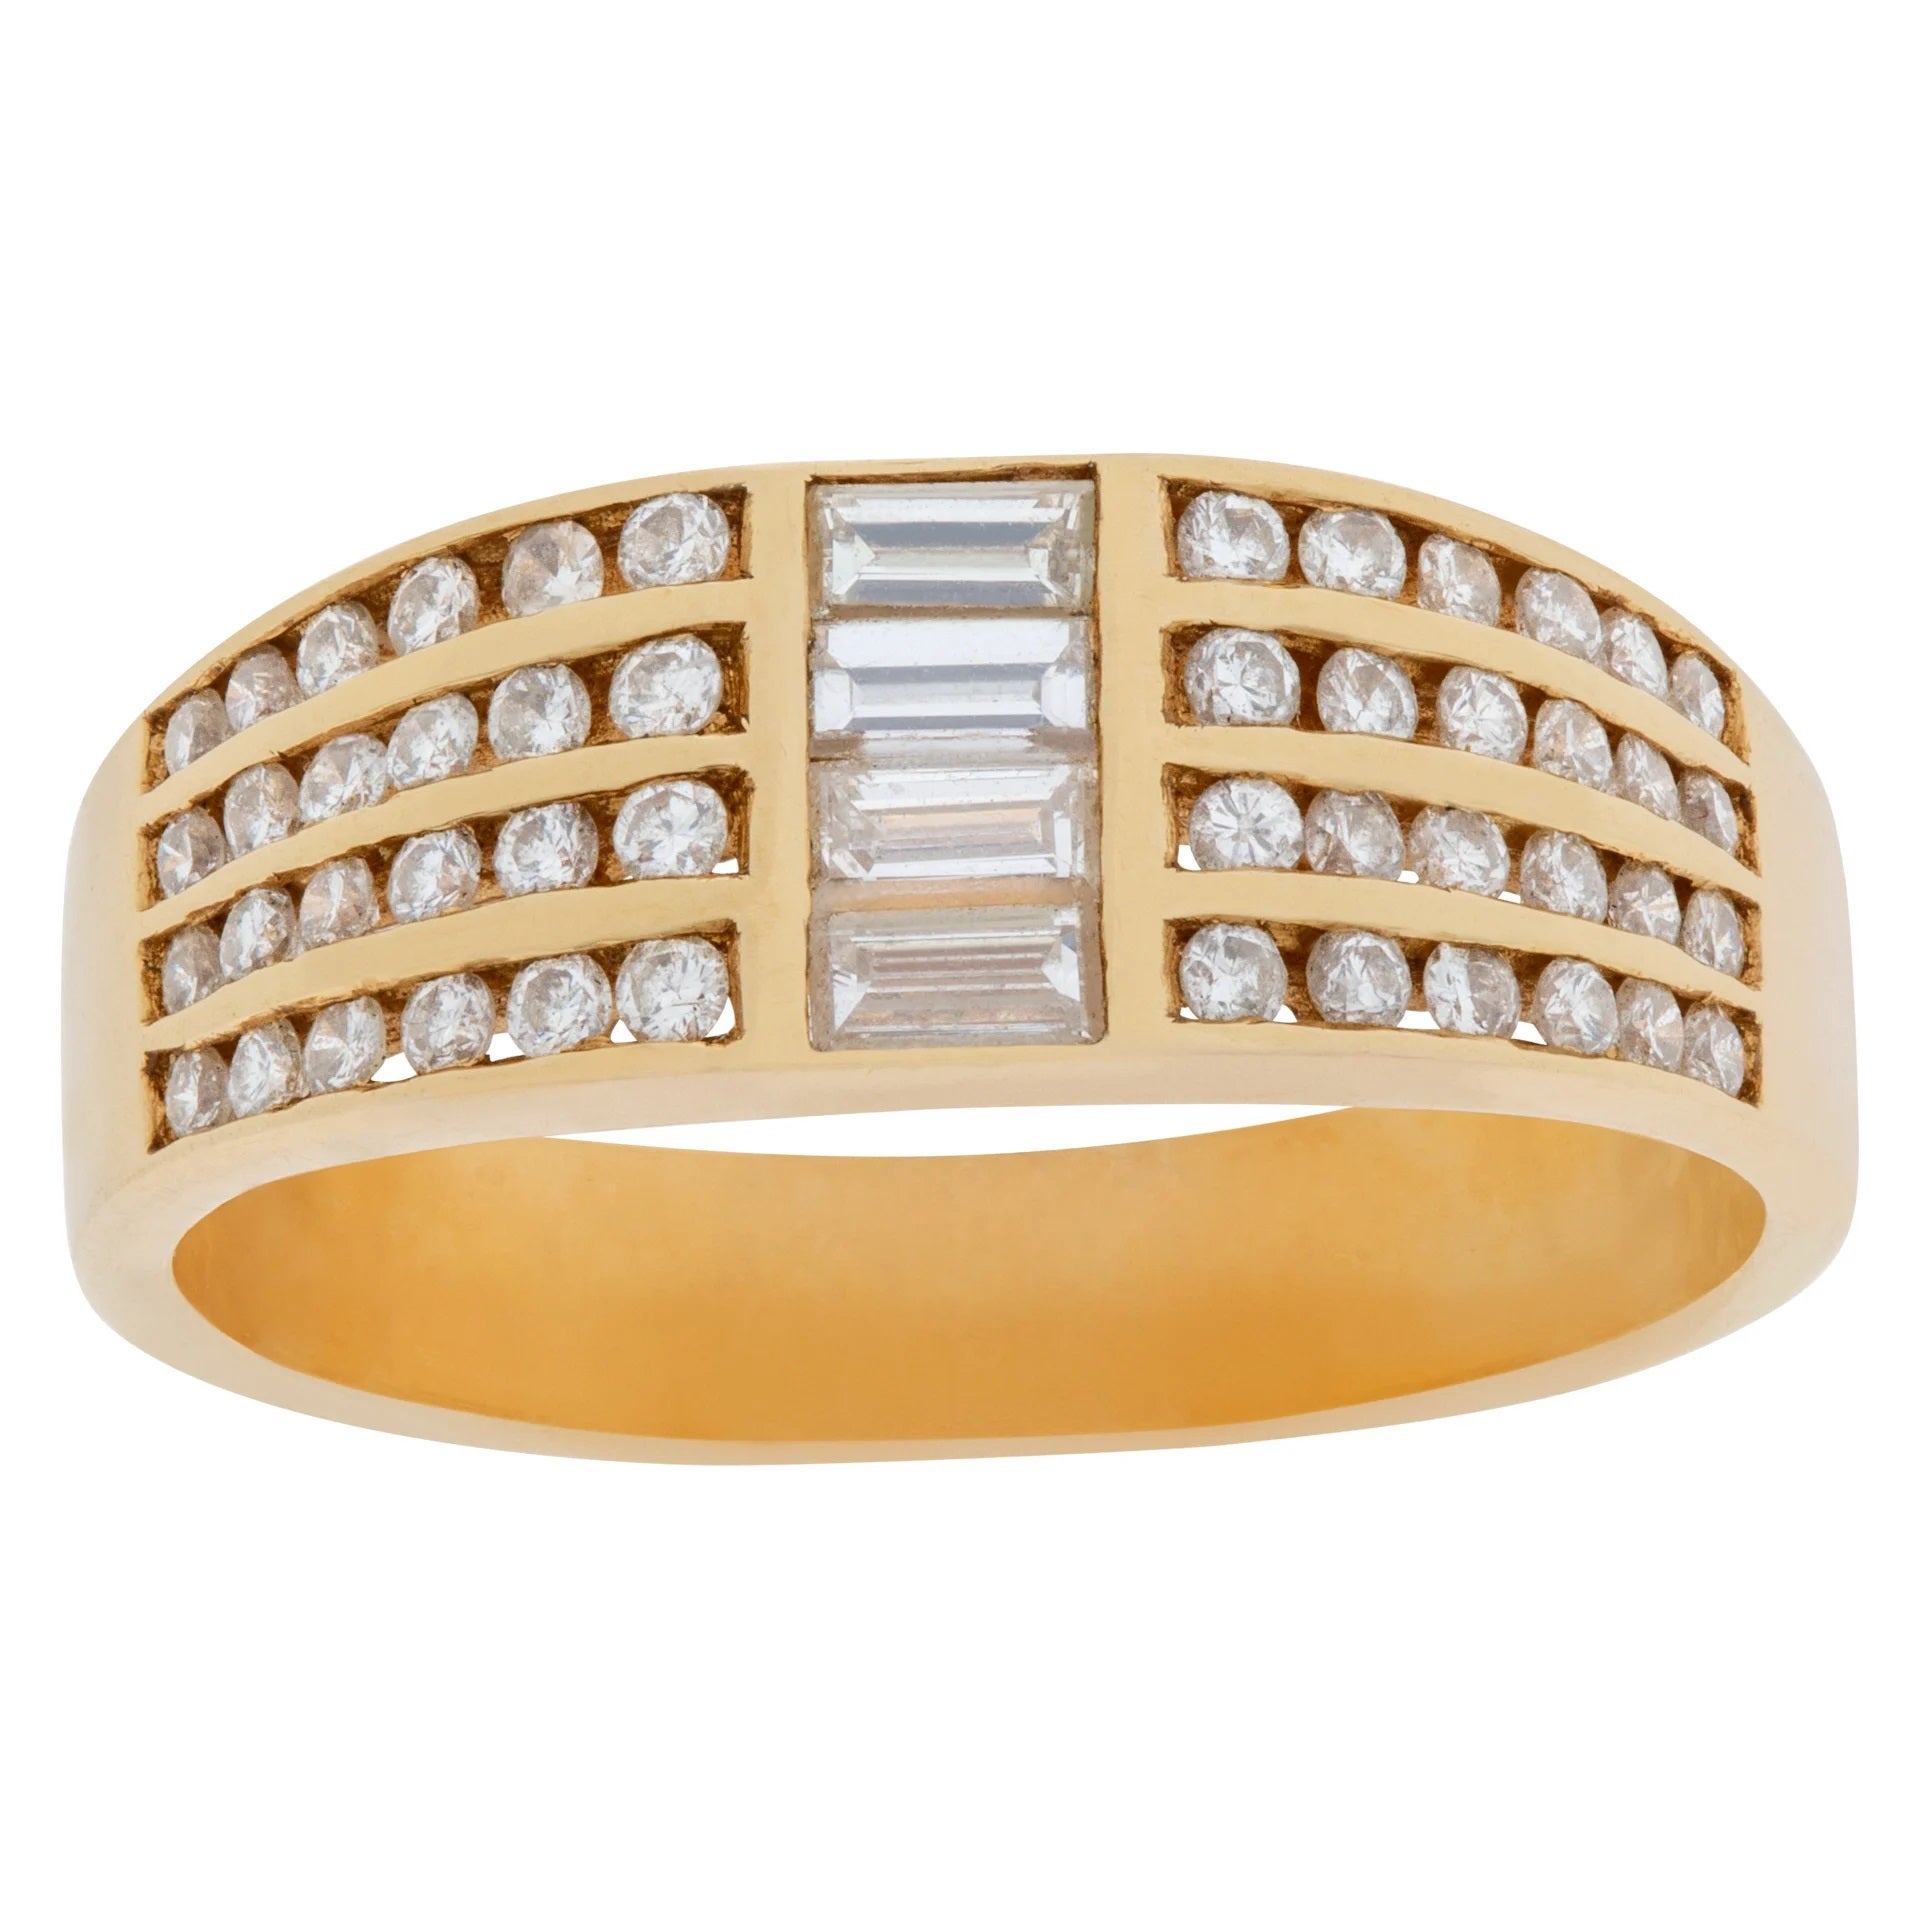 Channel-Set Baguette & Round Diamond Ring in 14k Gold. 0.70 Carats in Diamonds For Sale